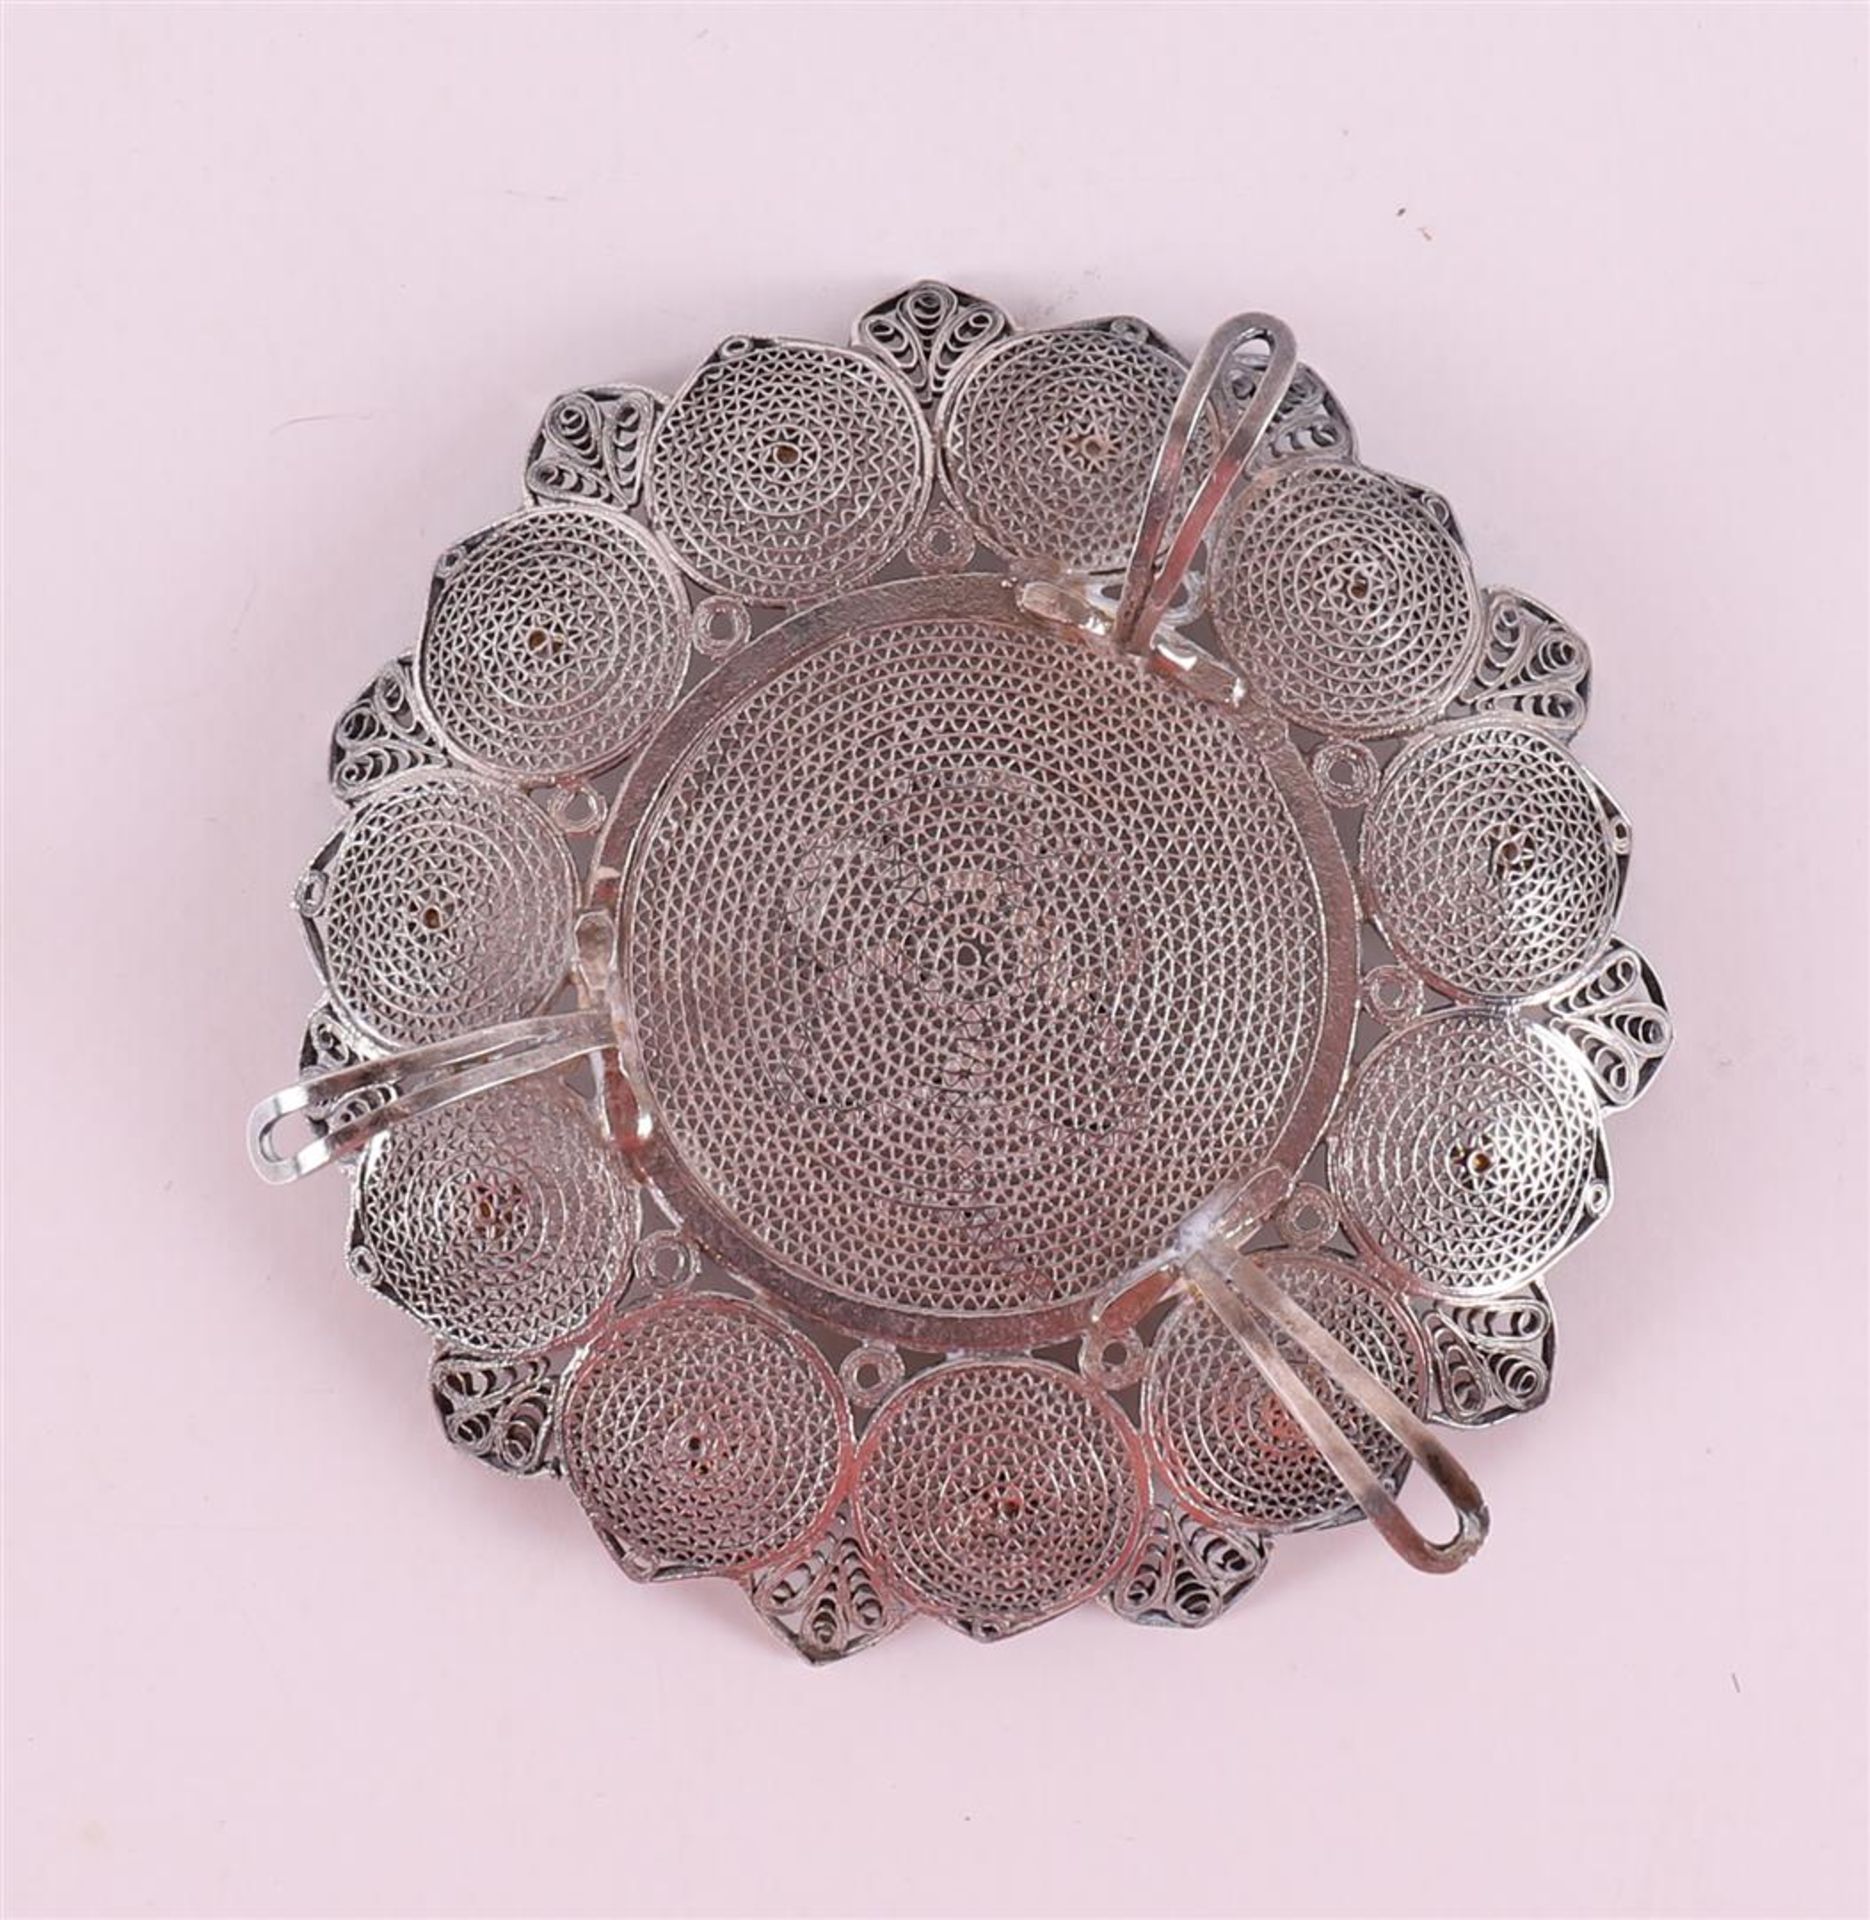 A silver lotus-shaped flirain dish, Indonesia, early 20th century, h 2.7 x Ø 8.7 cm. - Image 3 of 3